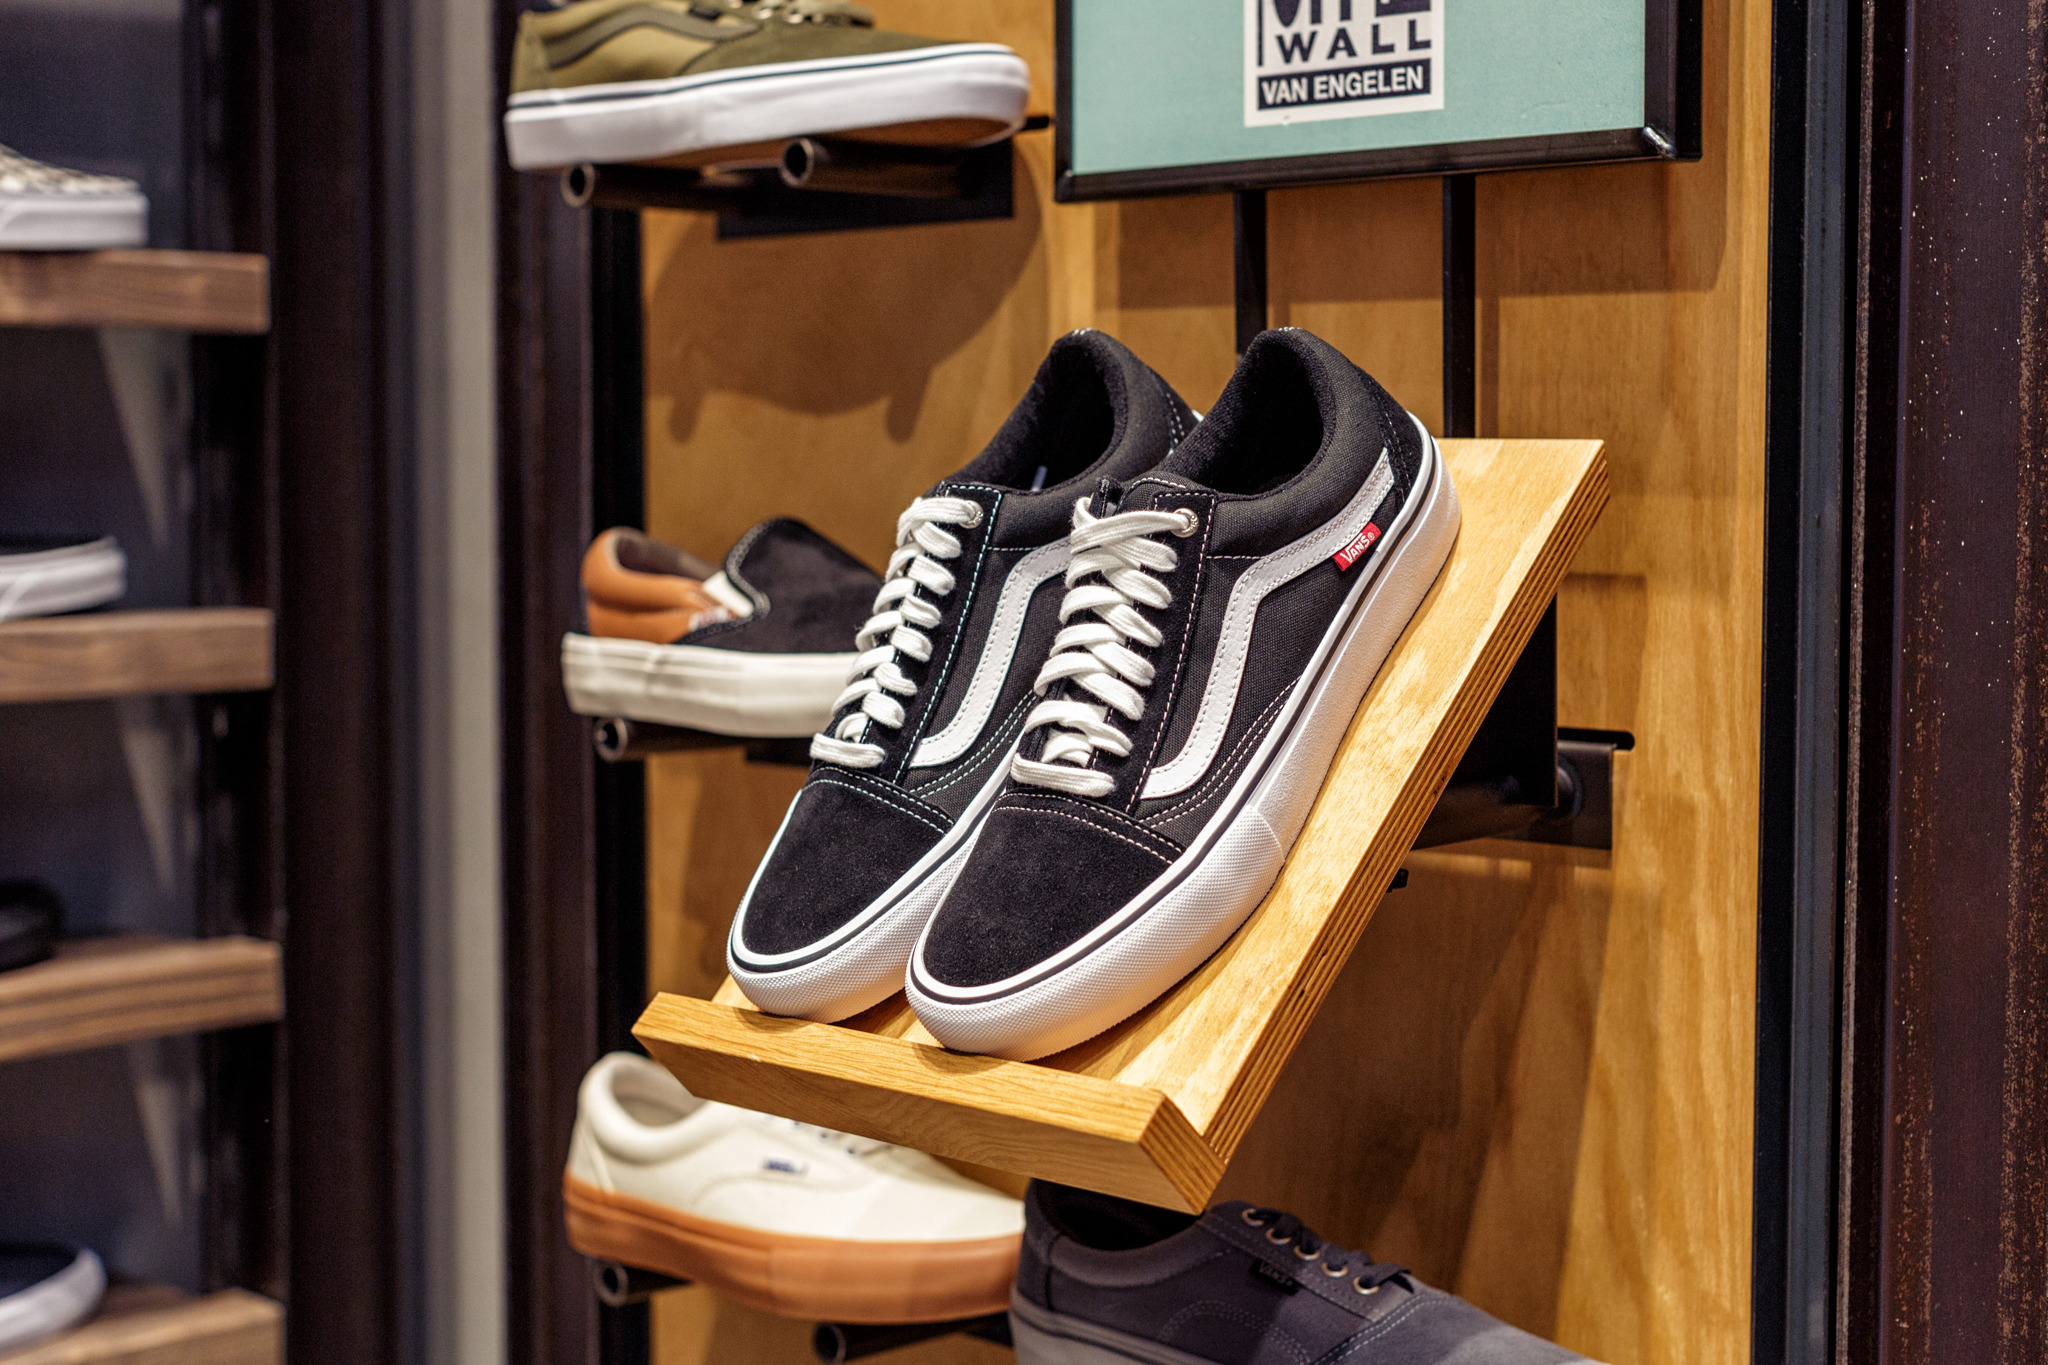 Vans Opens New Flagship Store in Dubai Mall